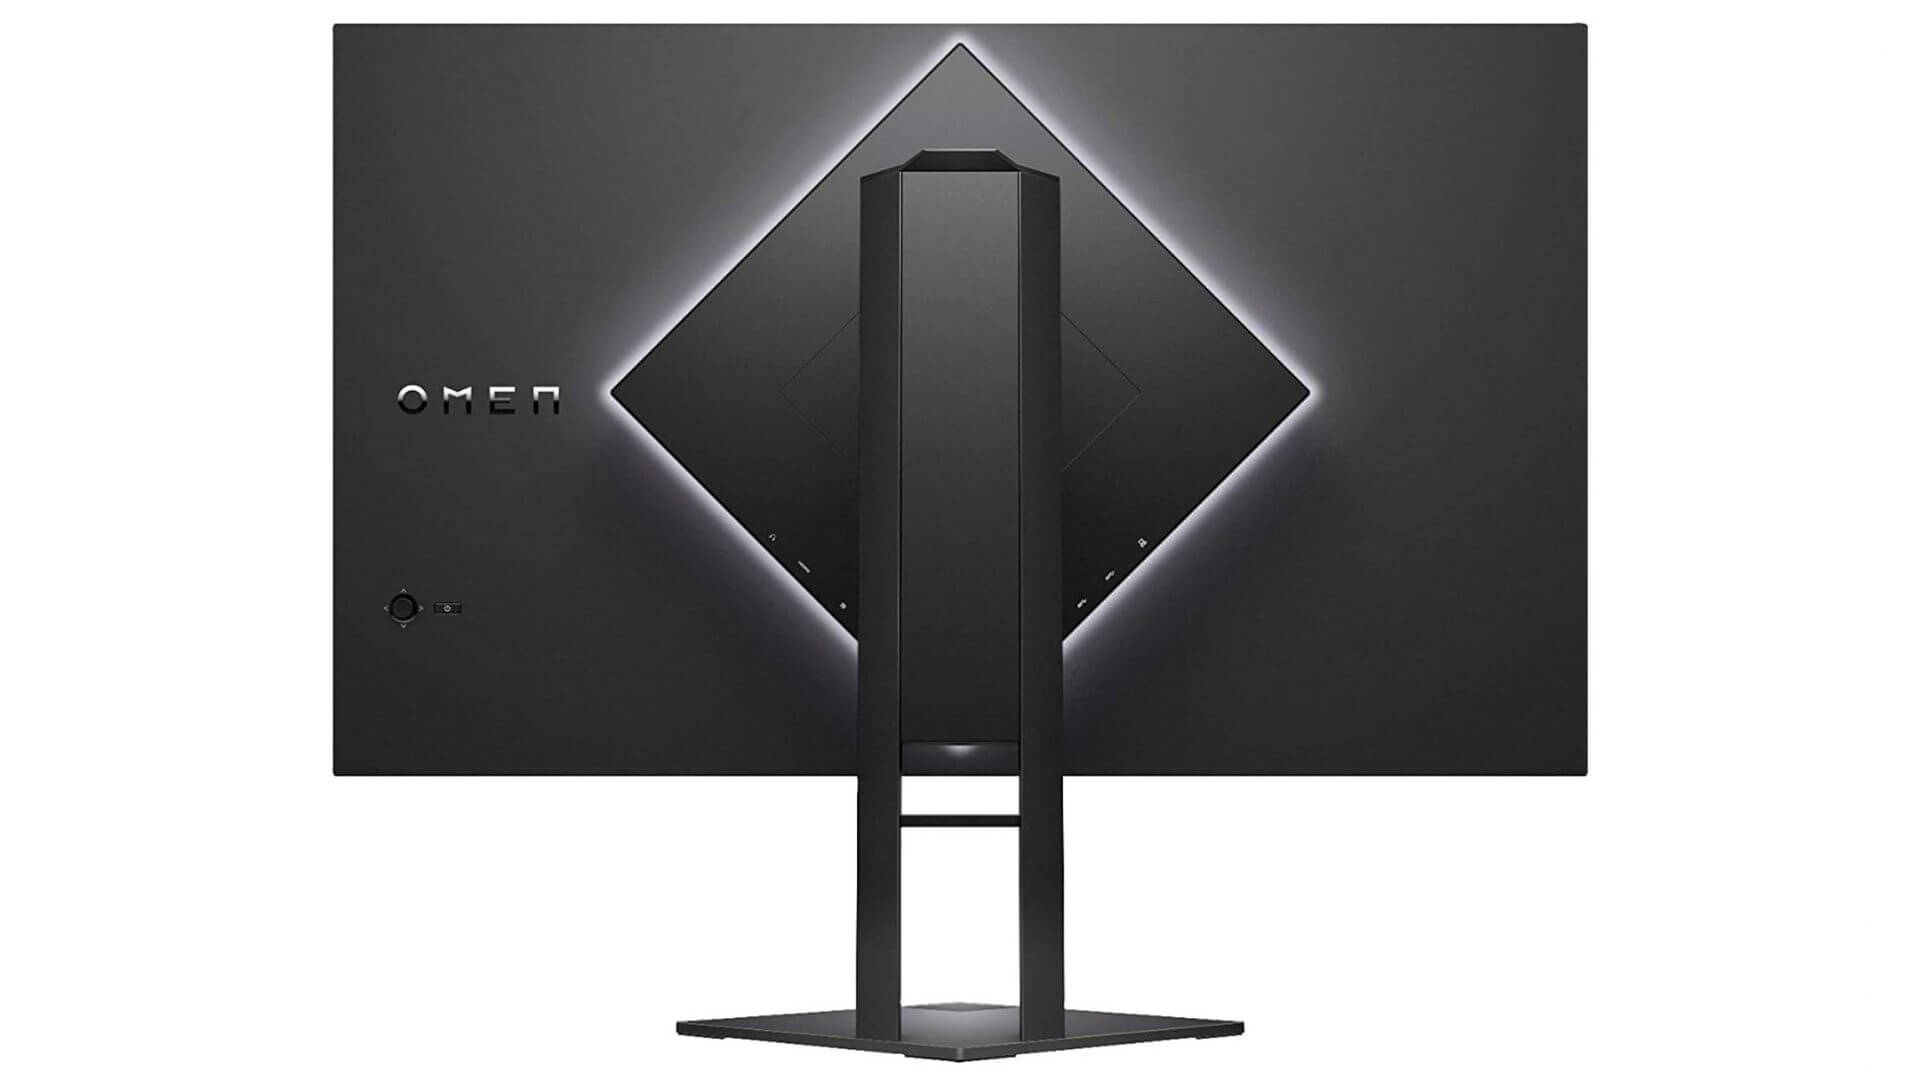 BAck view of the HP Omen 27i gaming monitor